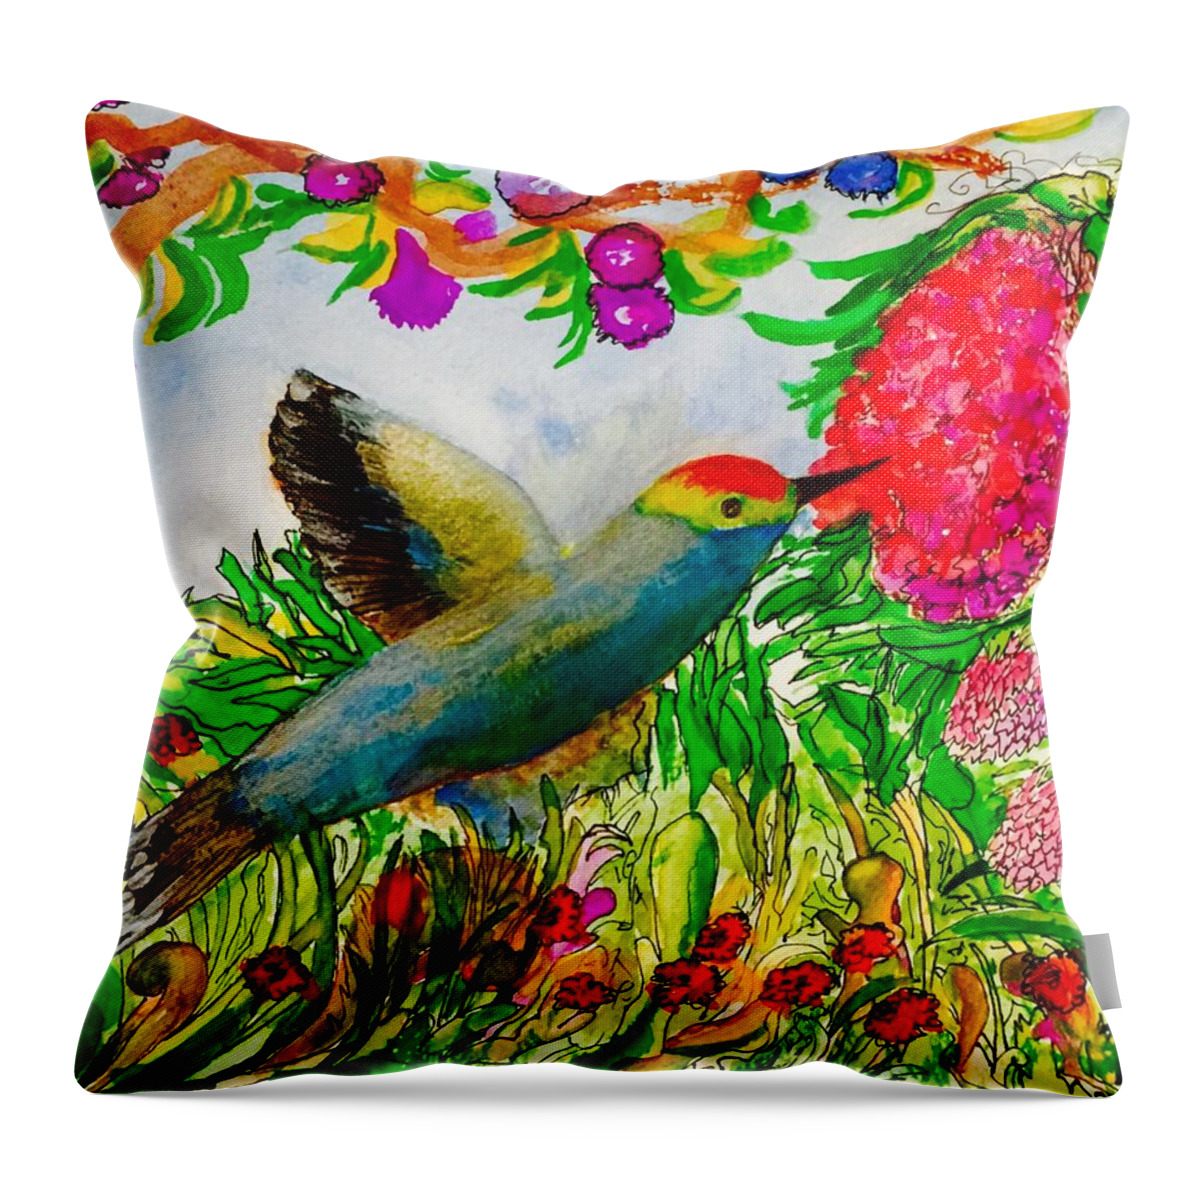 Juicy Throw Pillow featuring the painting Juicy Succulent Cuisine by Kenlynn Schroeder